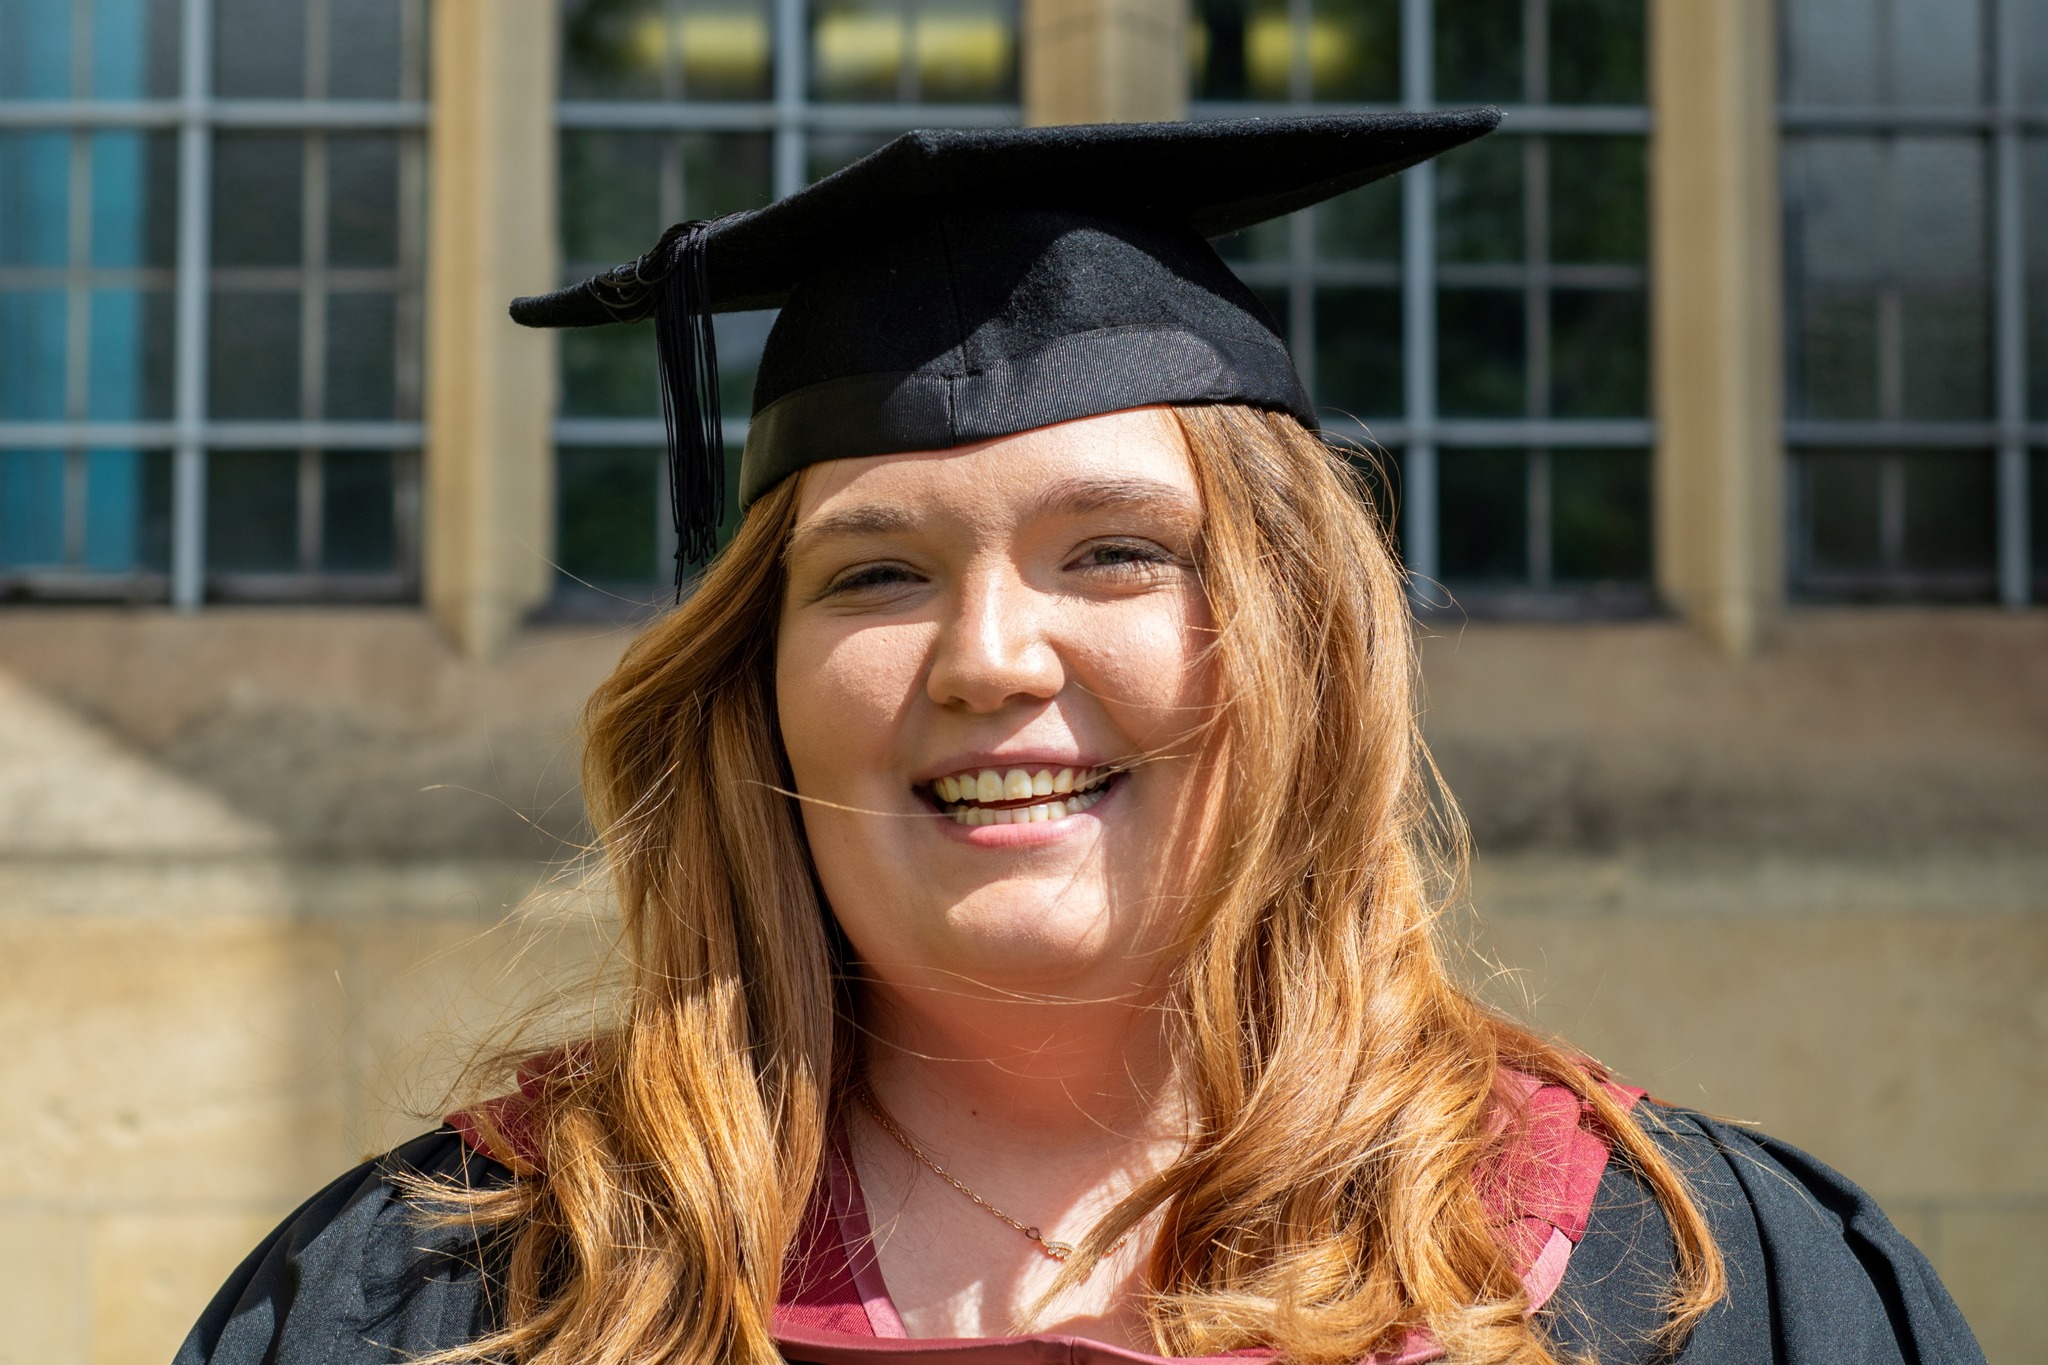 University of Bristol graduate Chloe Fussell on the day of her graduation